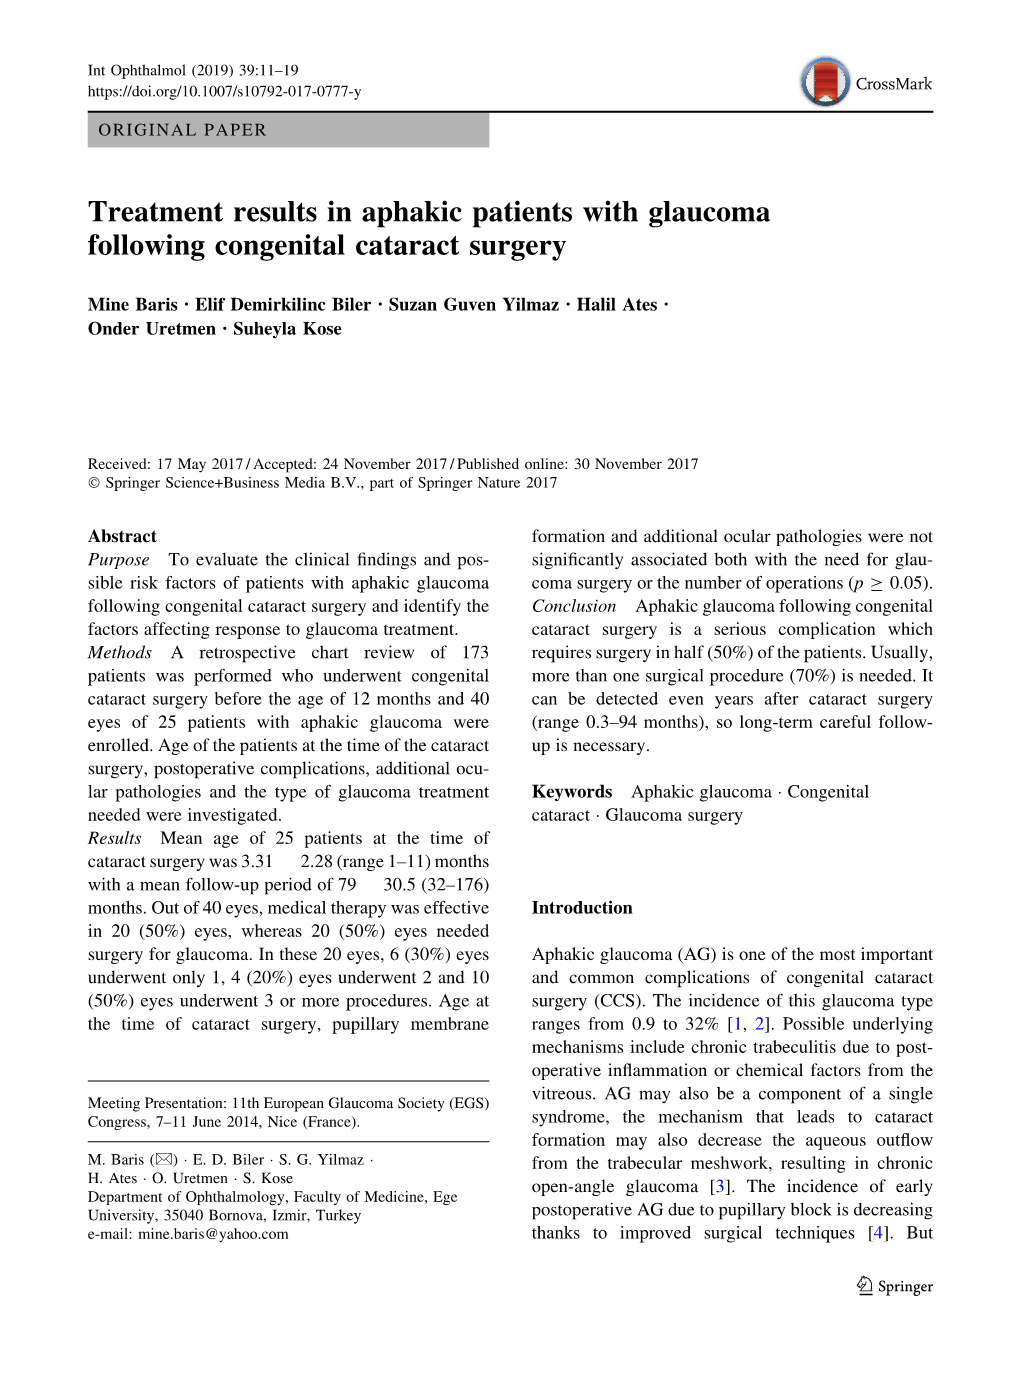 Treatment Results in Aphakic Patients with Glaucoma Following Congenital Cataract Surgery